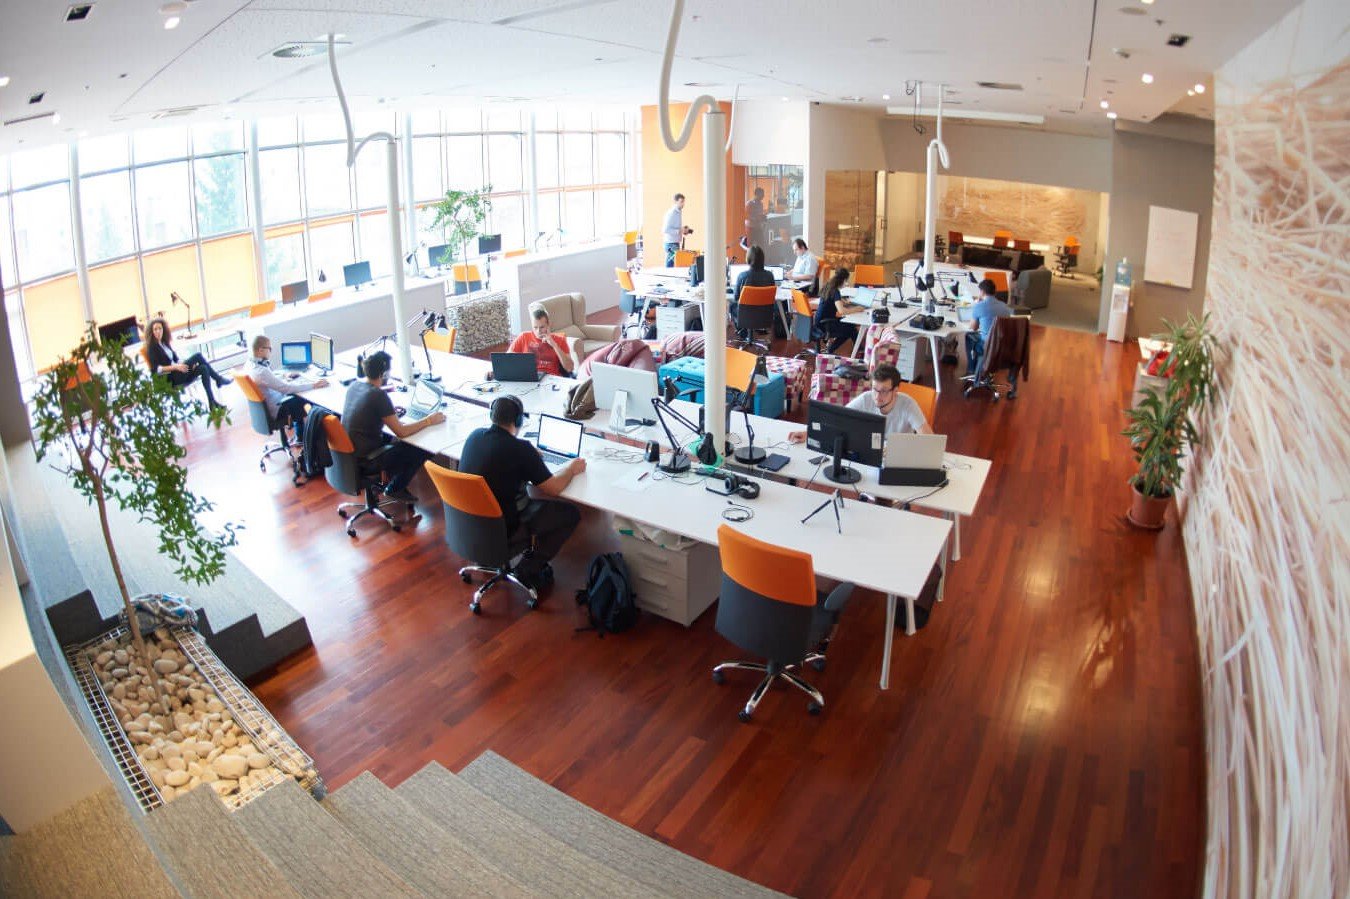 5 Ways to Attract & Retain Talent Through Your Office Design